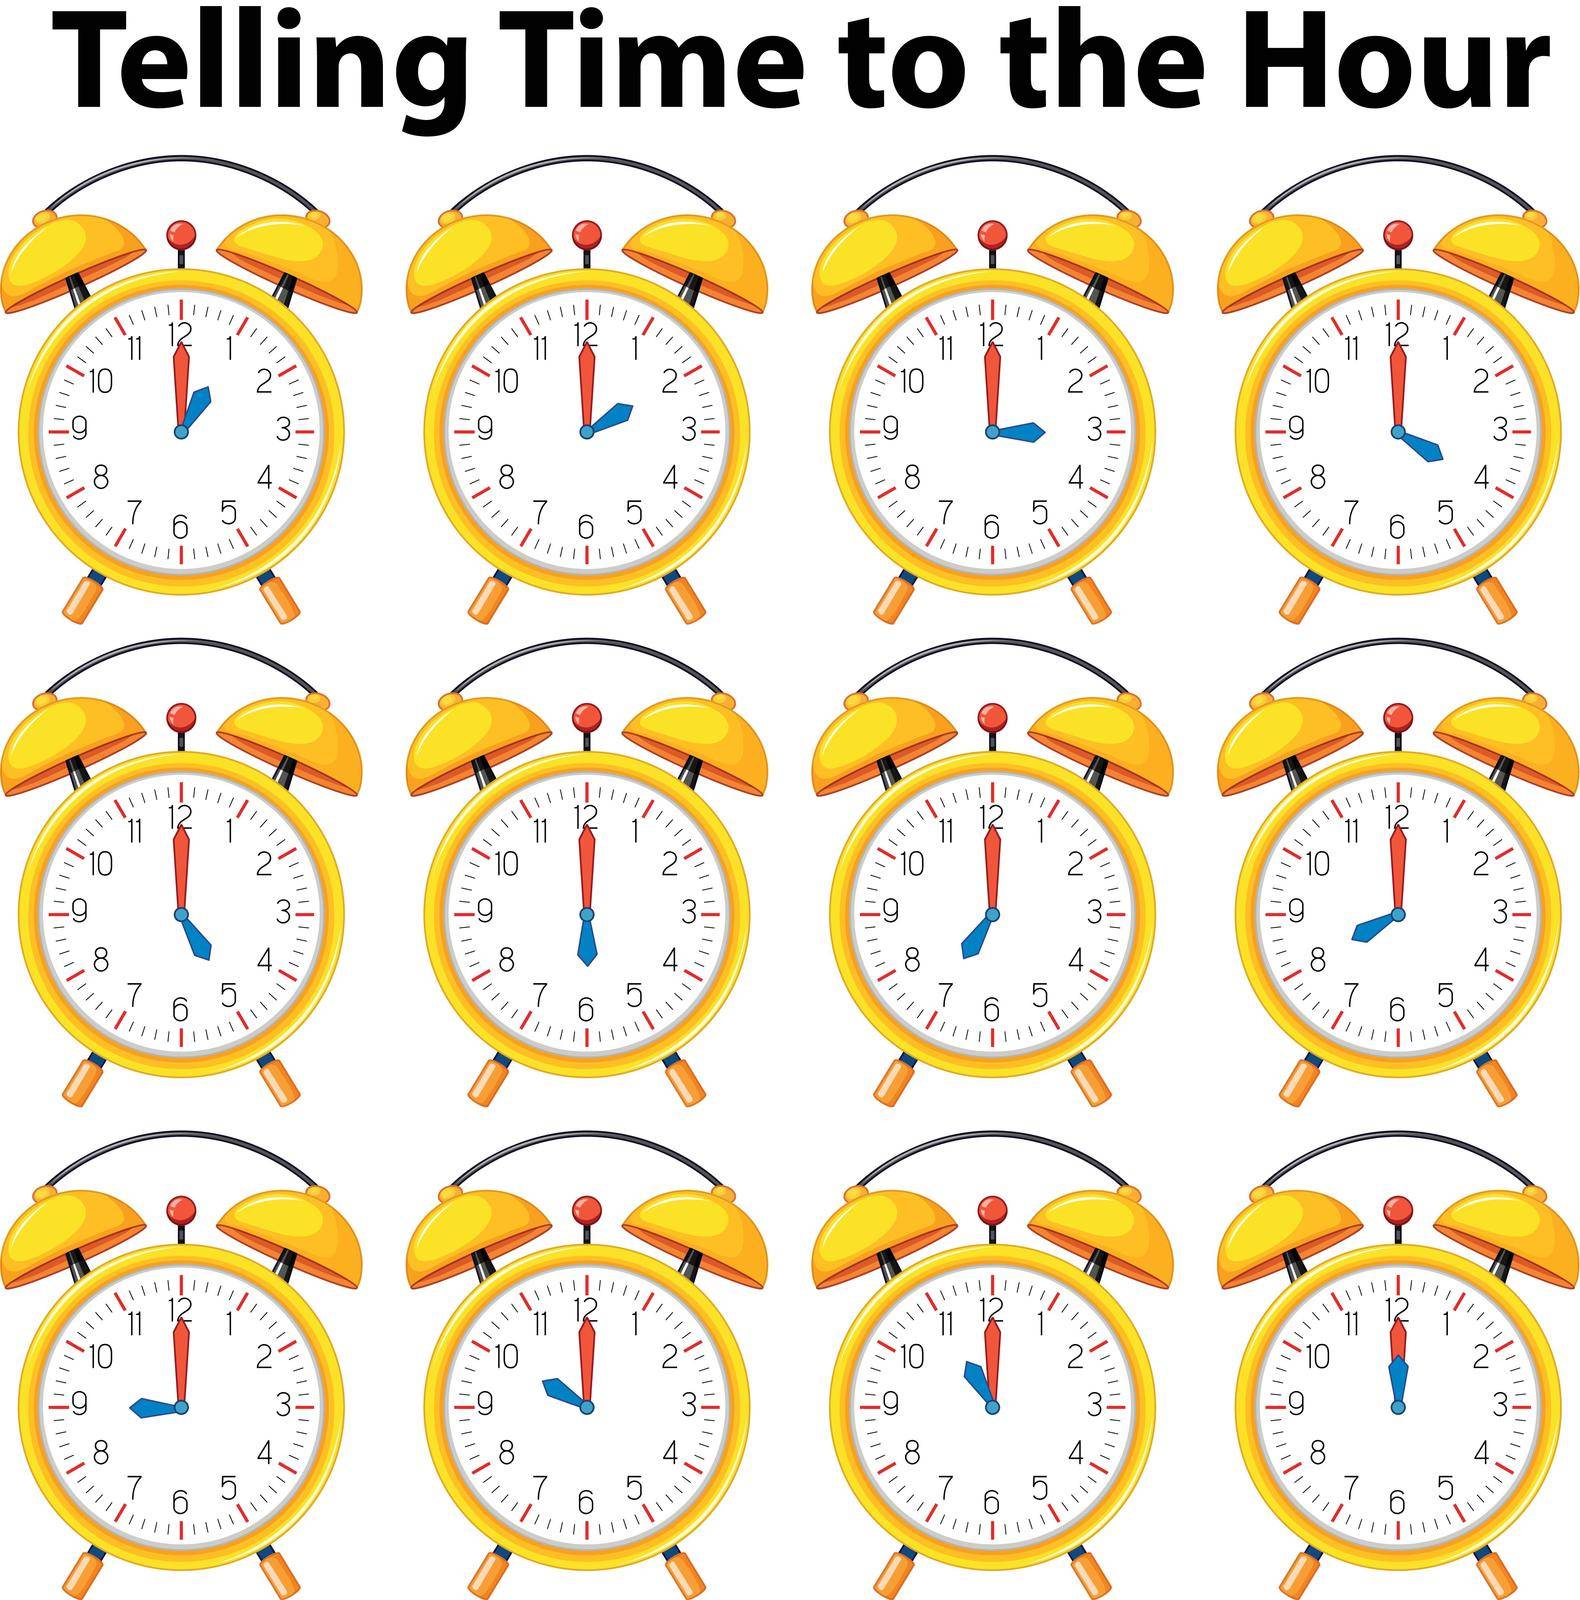 Telling time to the hour on yellow clock illustration